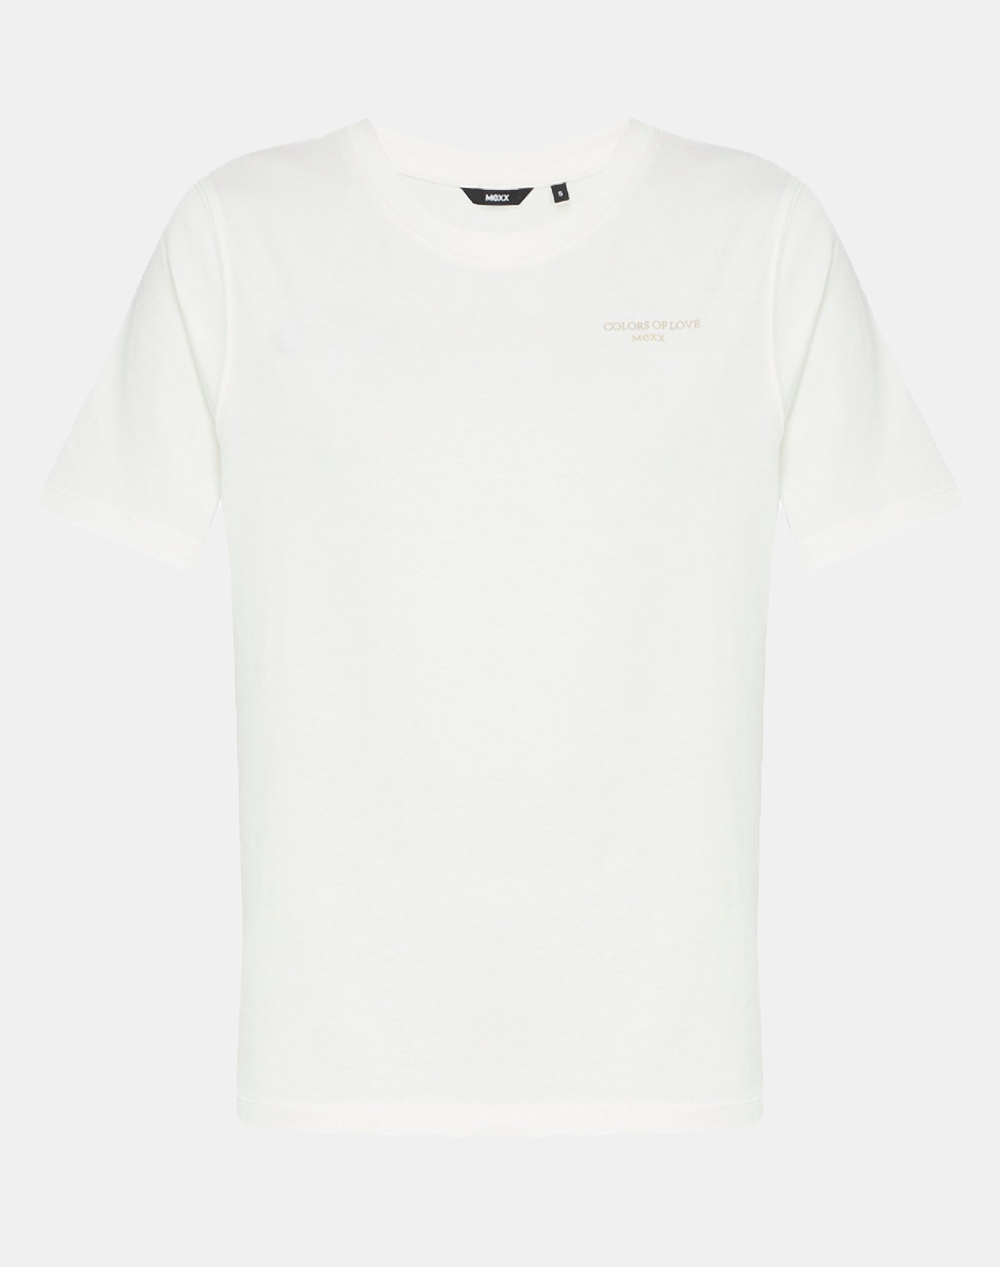 MEXX T-shirt with graphic print at back MF007813741W-110602 OffWhite